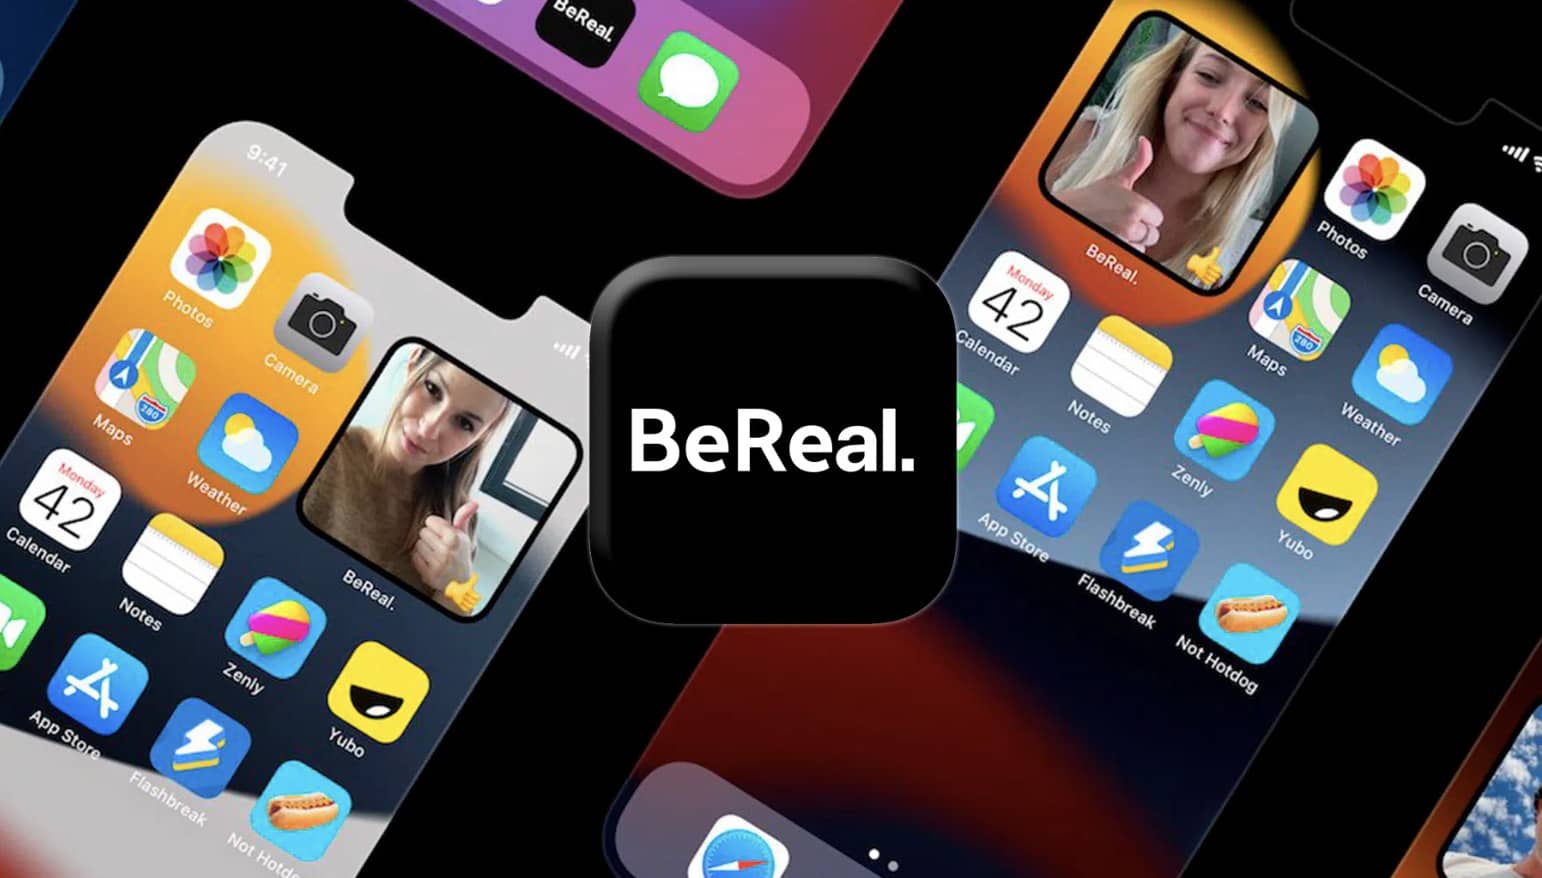 Is BeReal Poised to Take Over the Social Media Marketing World?